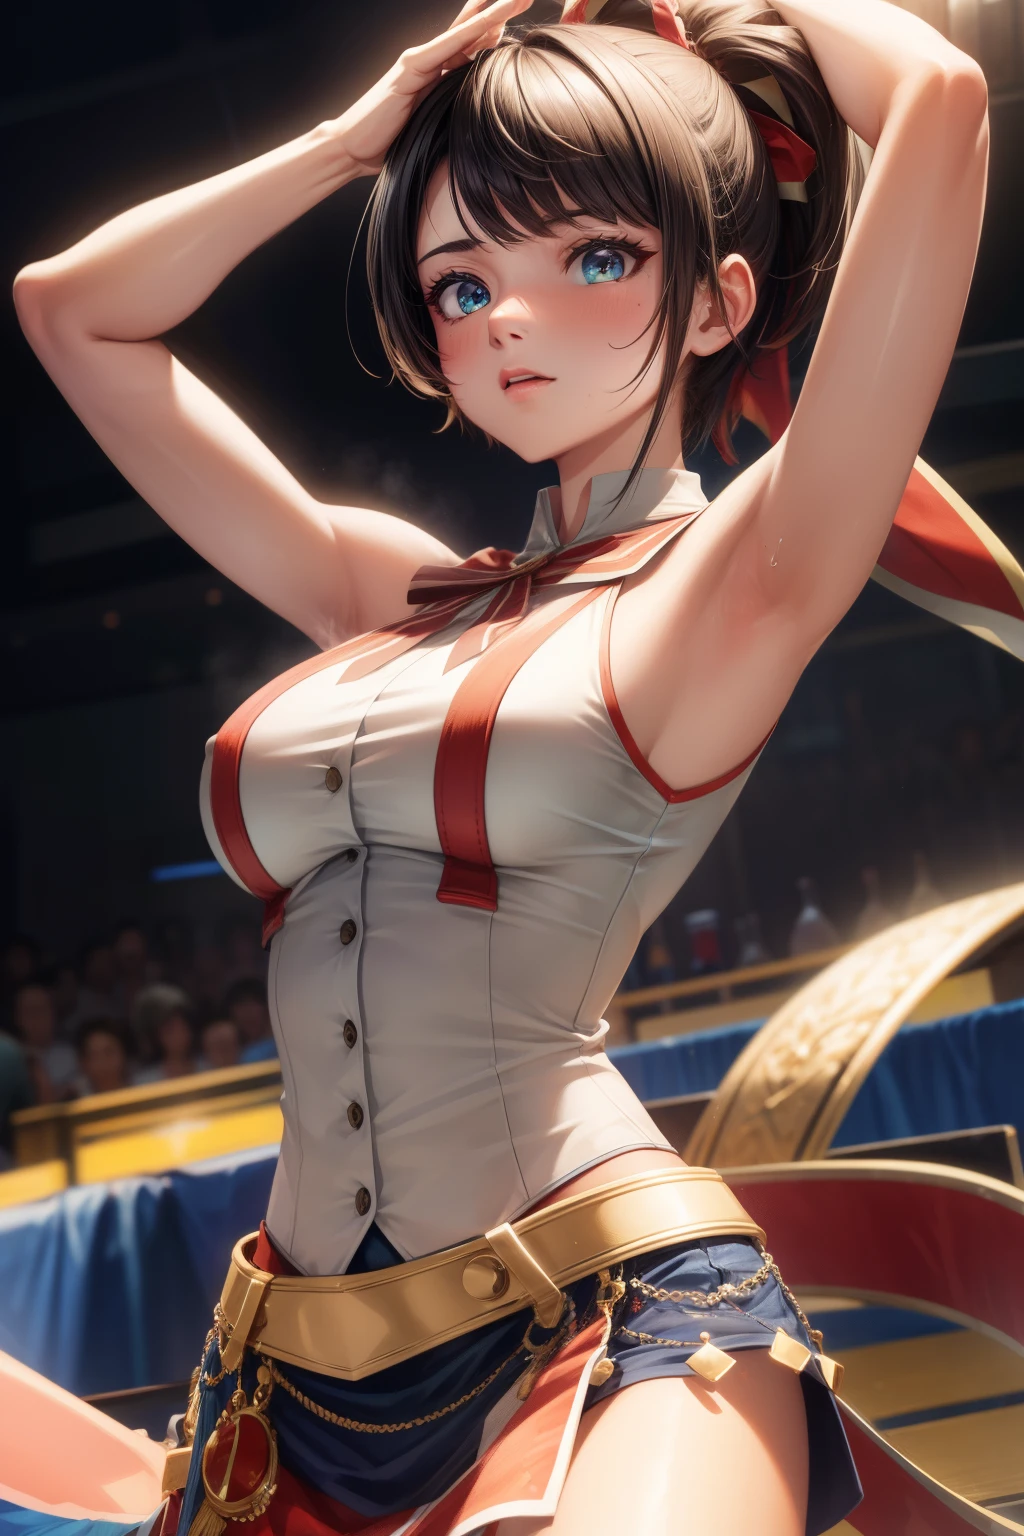 8K high resolution,detailed face,Detailed BPDY,perfect body,super high quality,1 girl,sleeveless shirt,Raise the hand,armpit, sweating